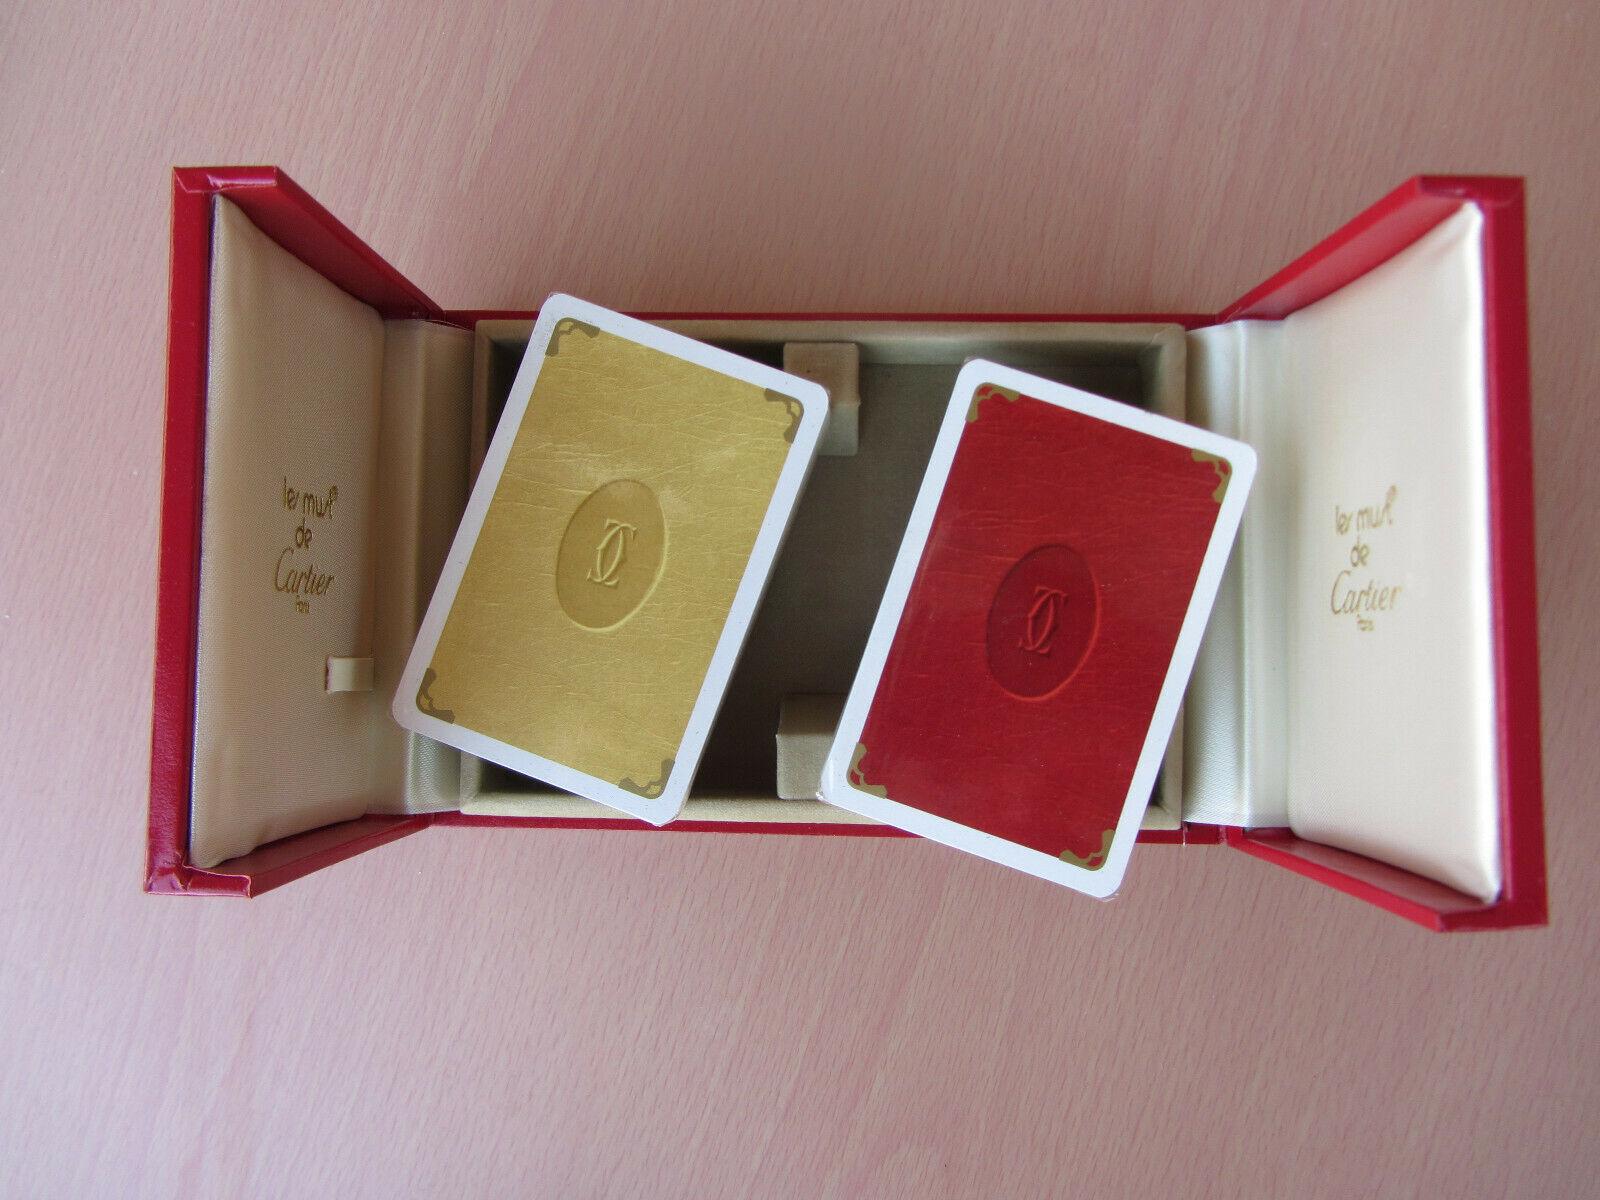 Hand-Crafted Must de Cartier Paris Vintage Playing Poker or Bridge Cards in Red Original Box